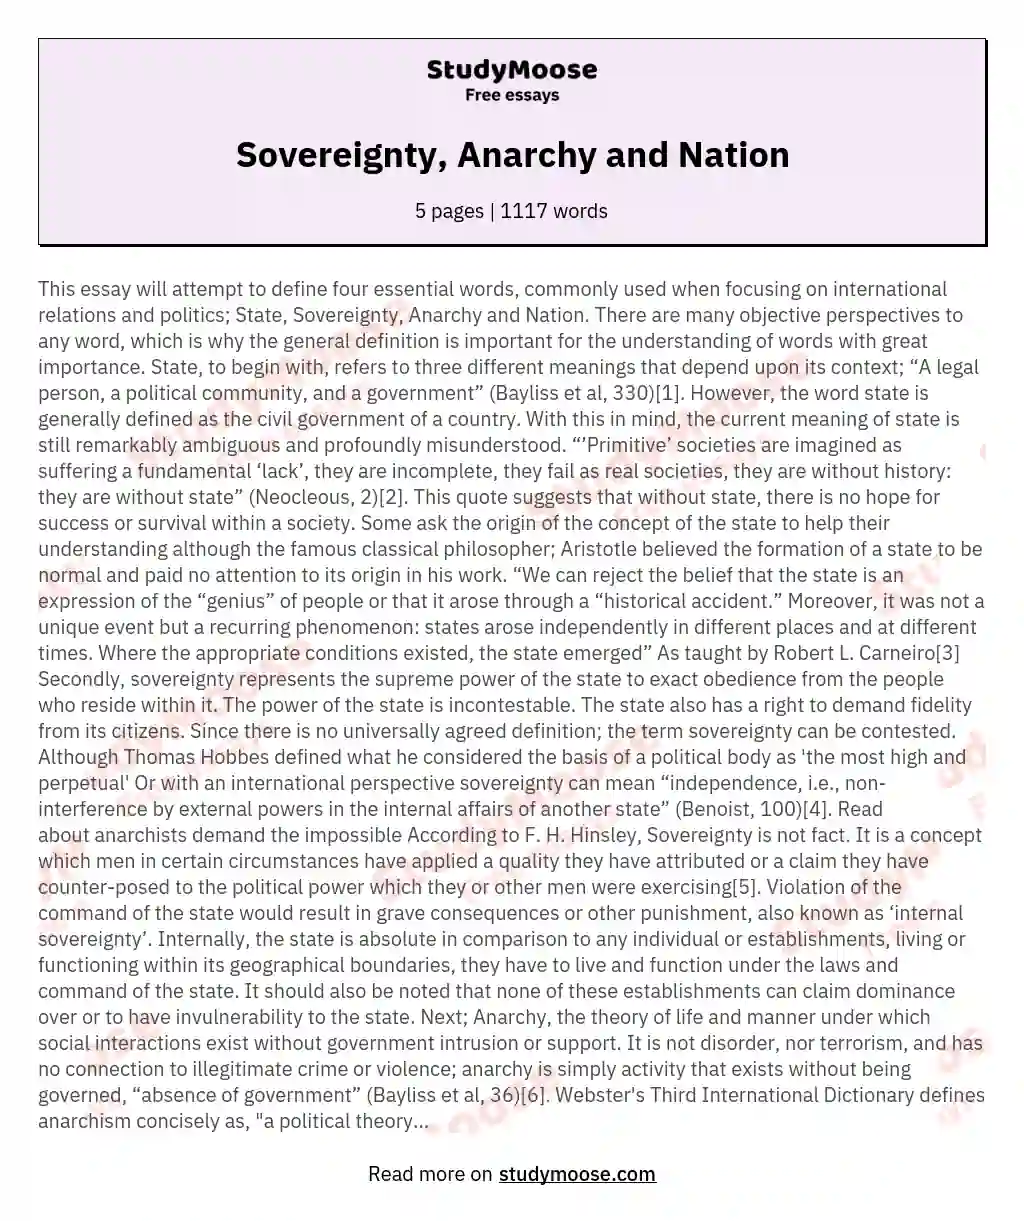 Sovereignty, Anarchy and Nation